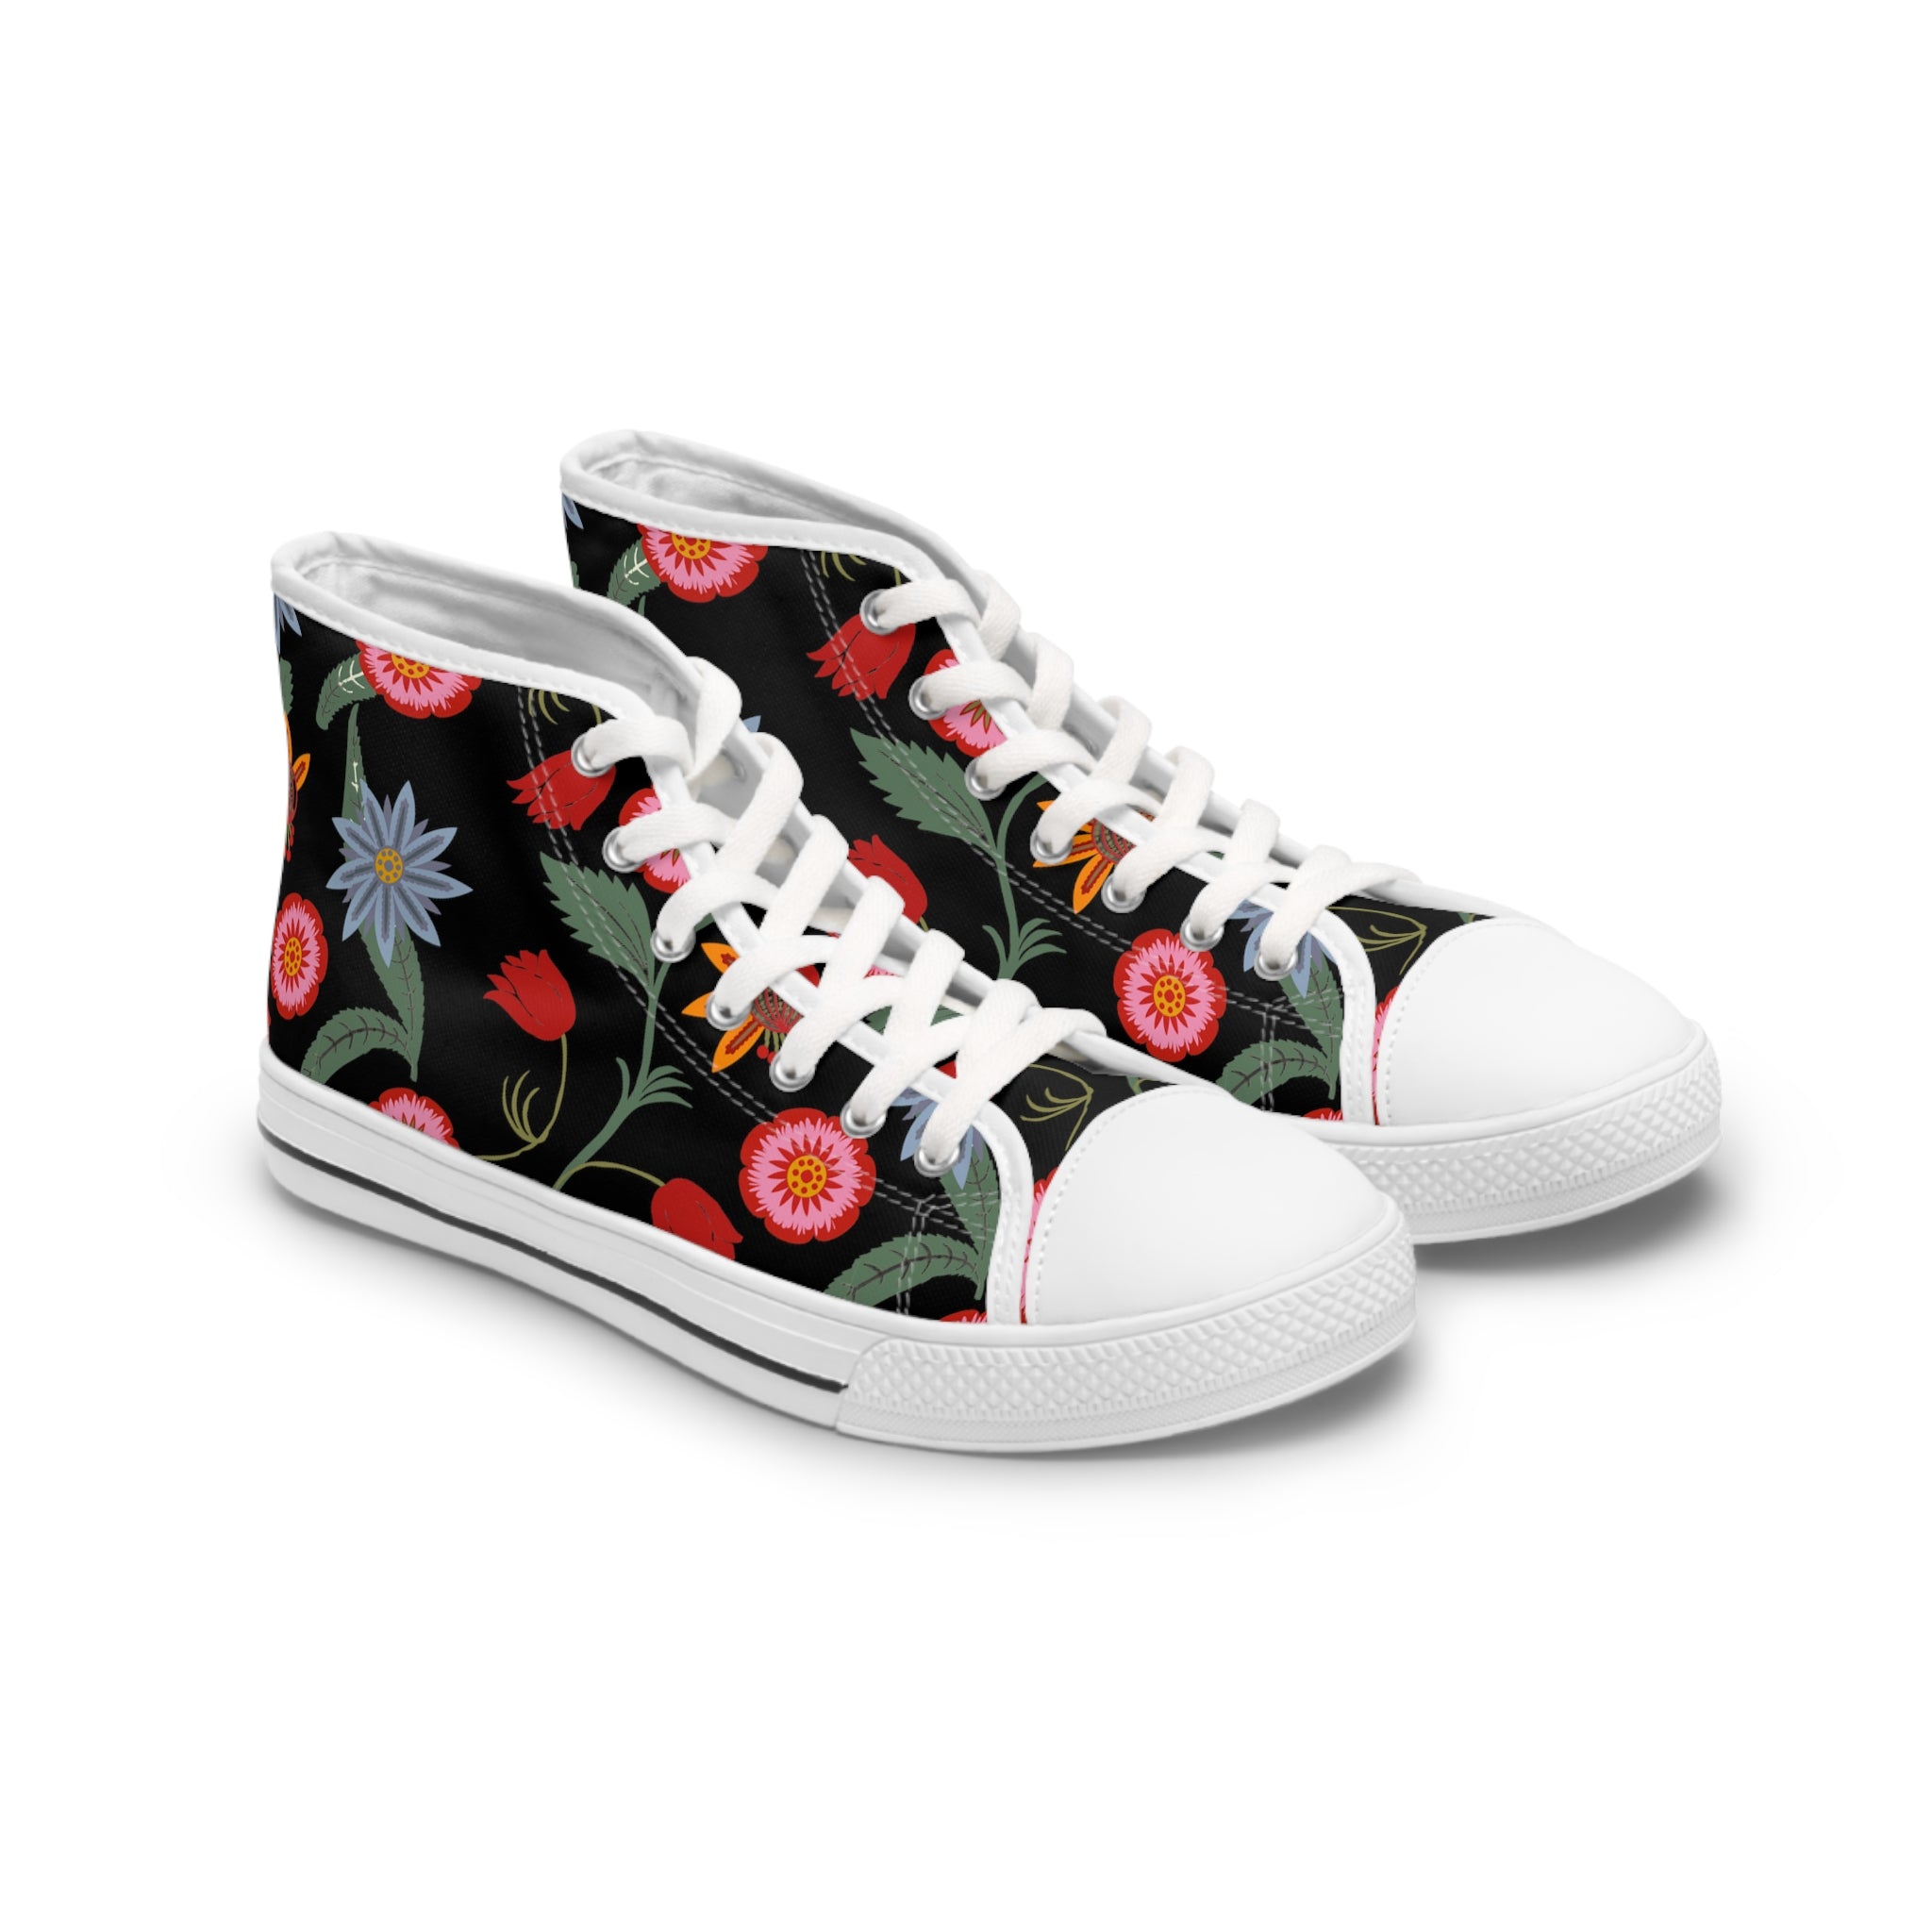  Women's Casual Wear Collection Stay Wild (Flowers) Women's High Top Sneakers, Ladies High-Tops ShoesUS12Whitesole